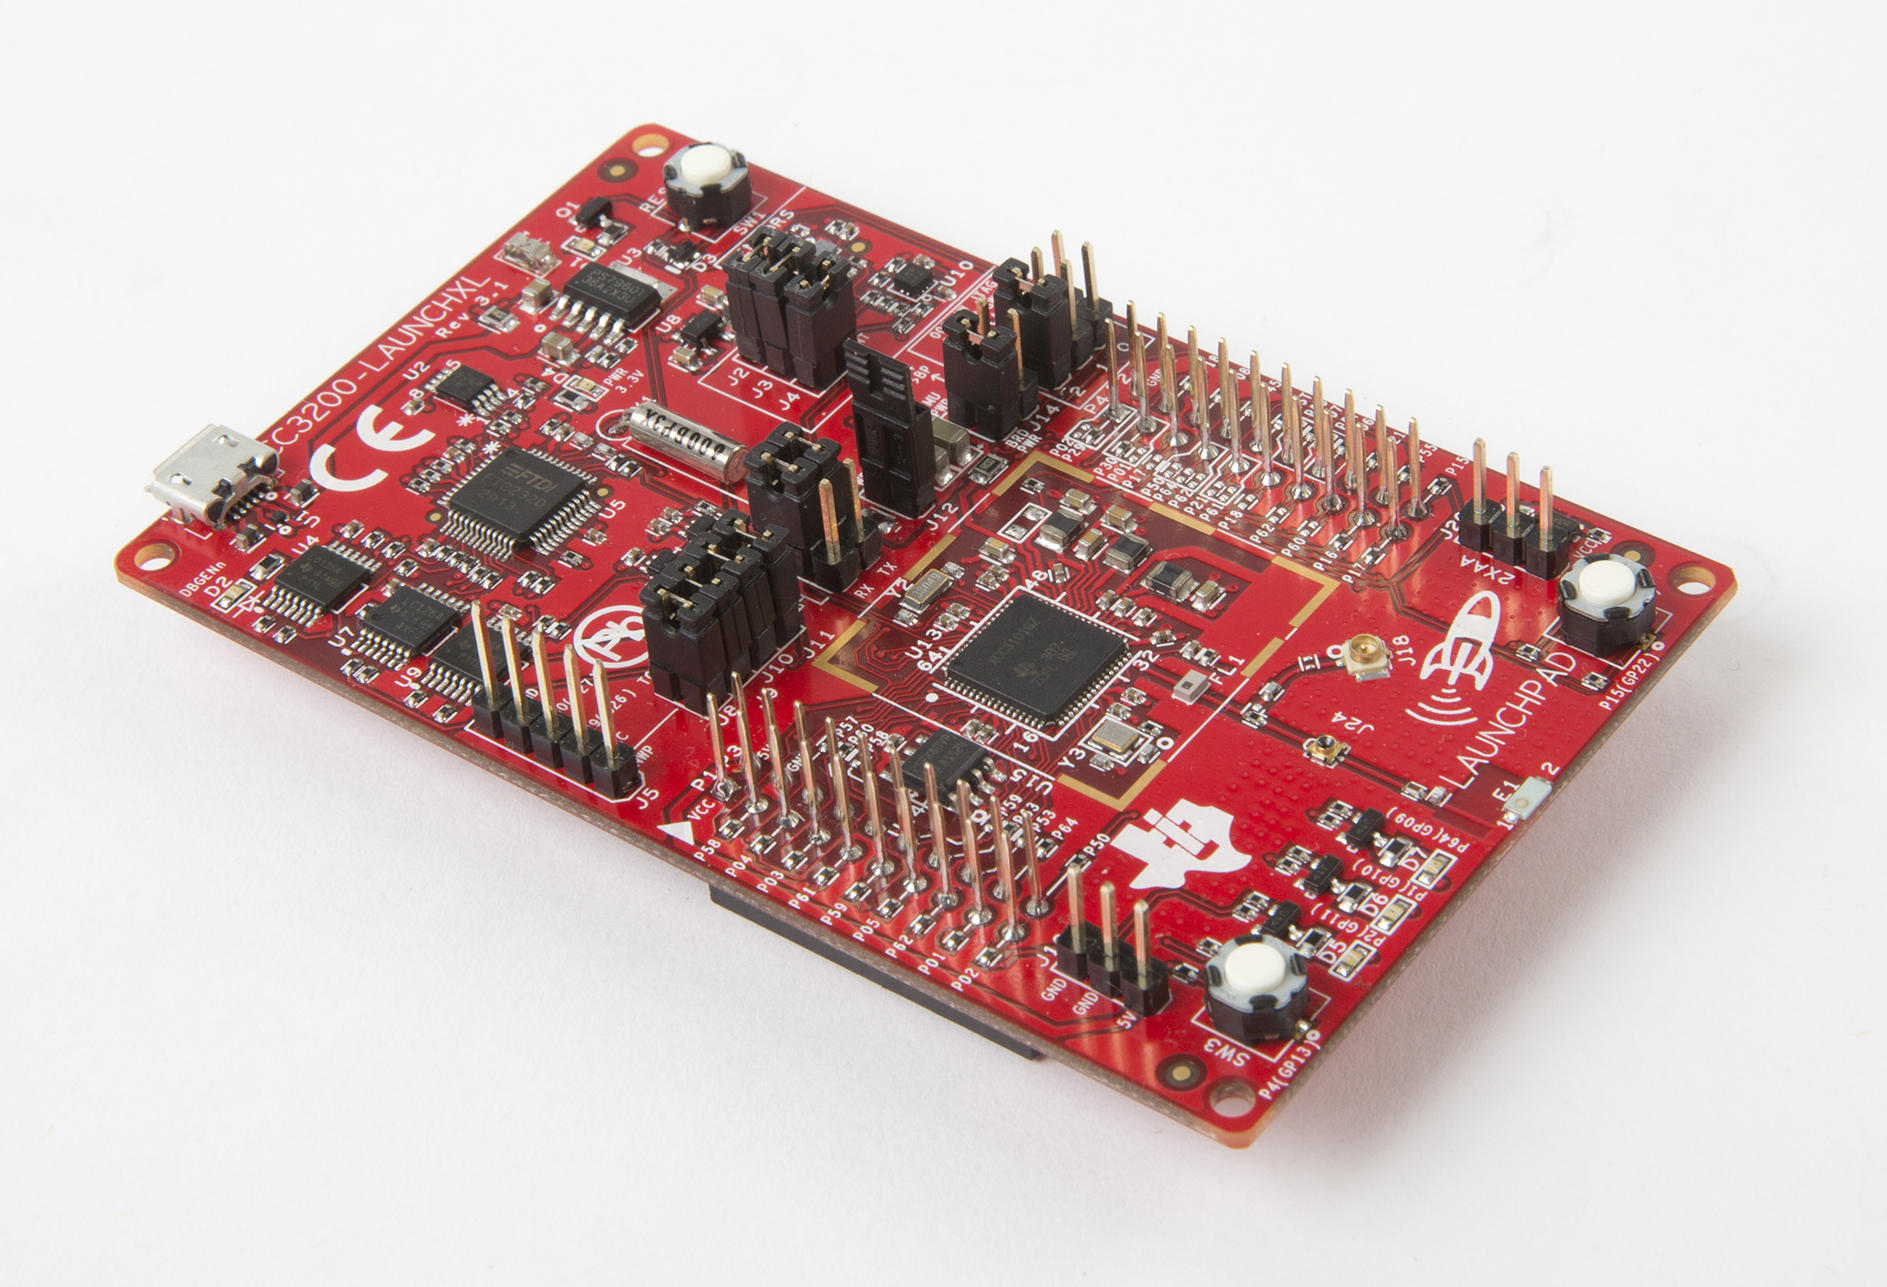 Image of TI's SimpleLink Wi-Fi CC3200 LaunchPad evaluation kit